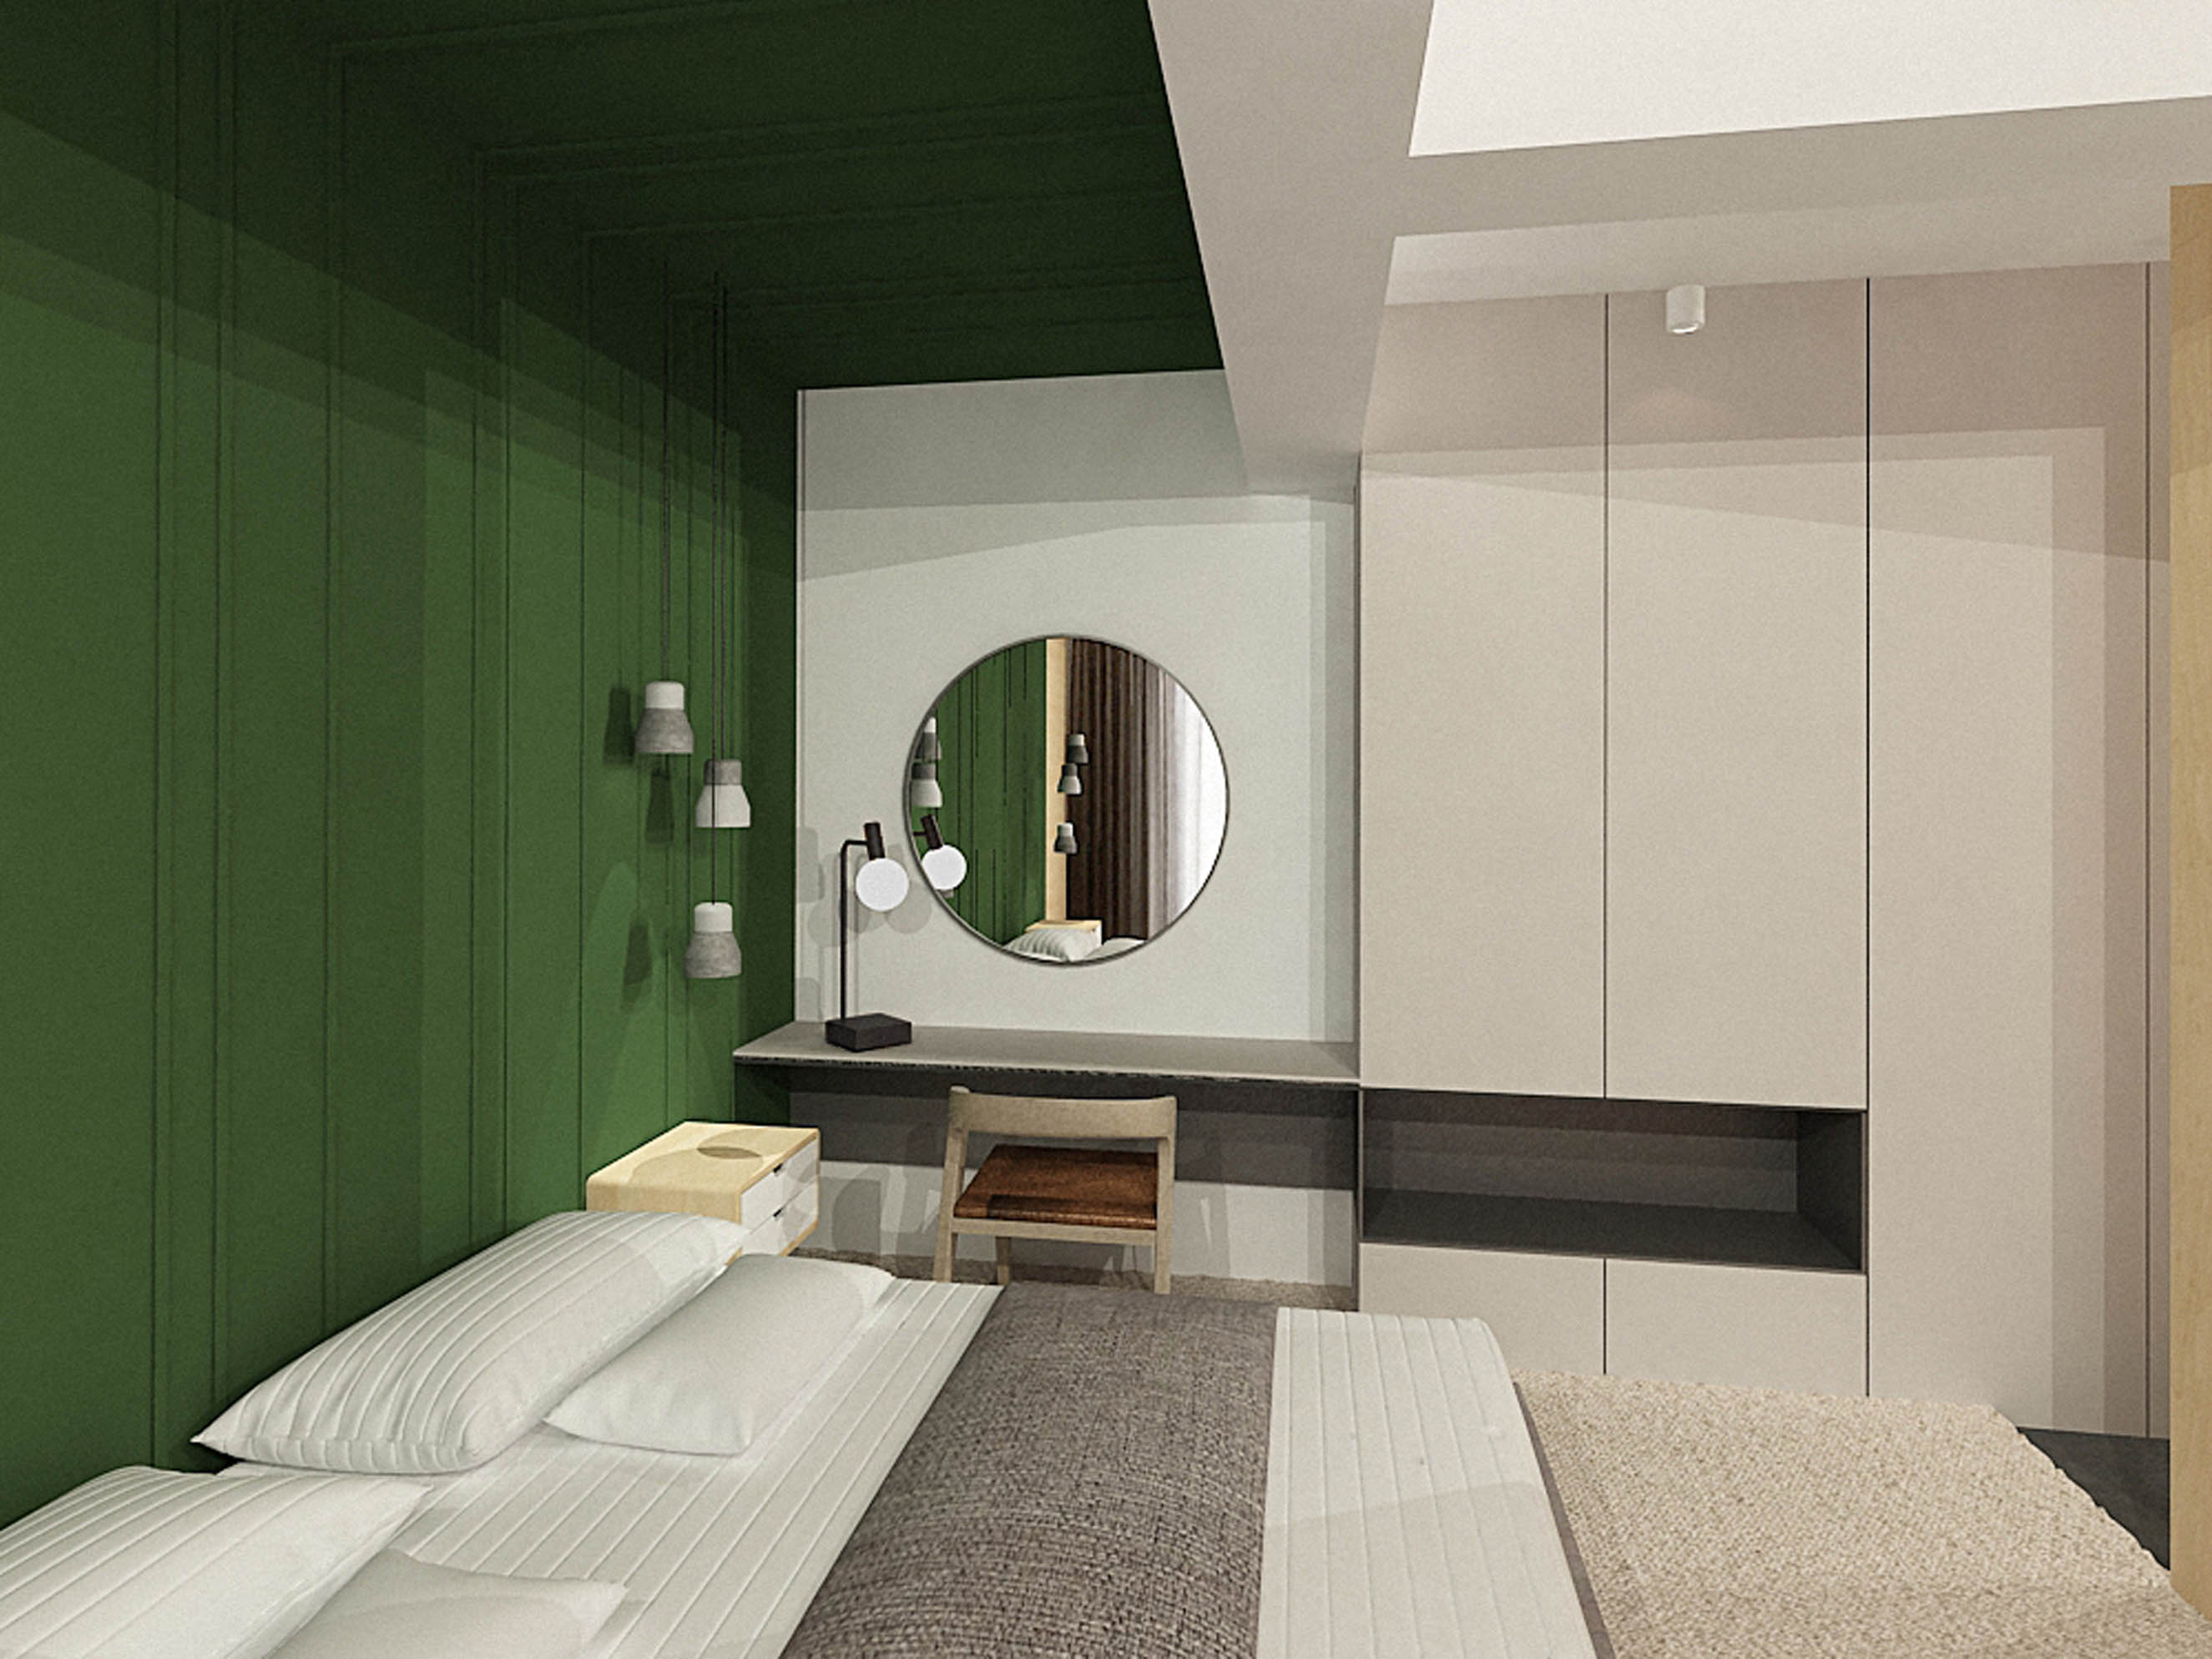 Modern minimalist bedroom with green color block, wooden panel walls and hanging concrete lamps